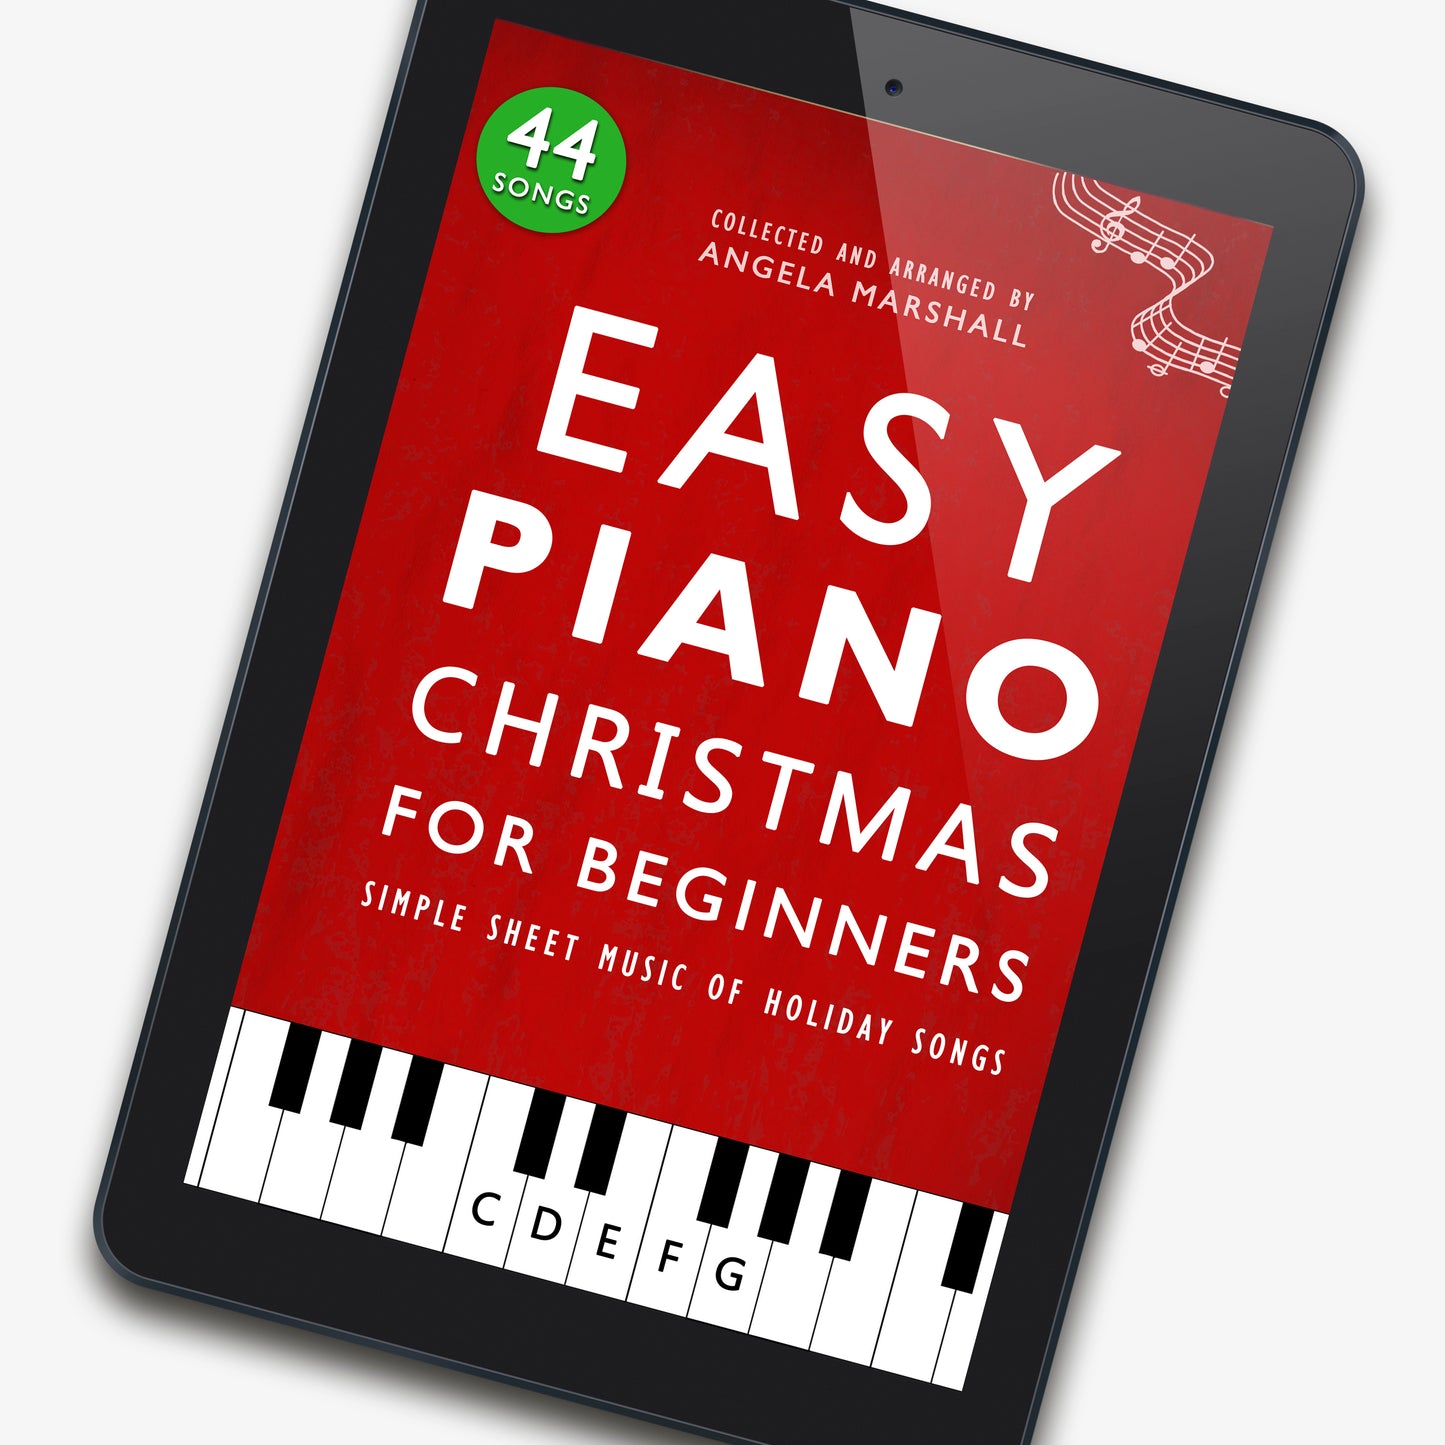 Easy Piano Christmas for Beginners